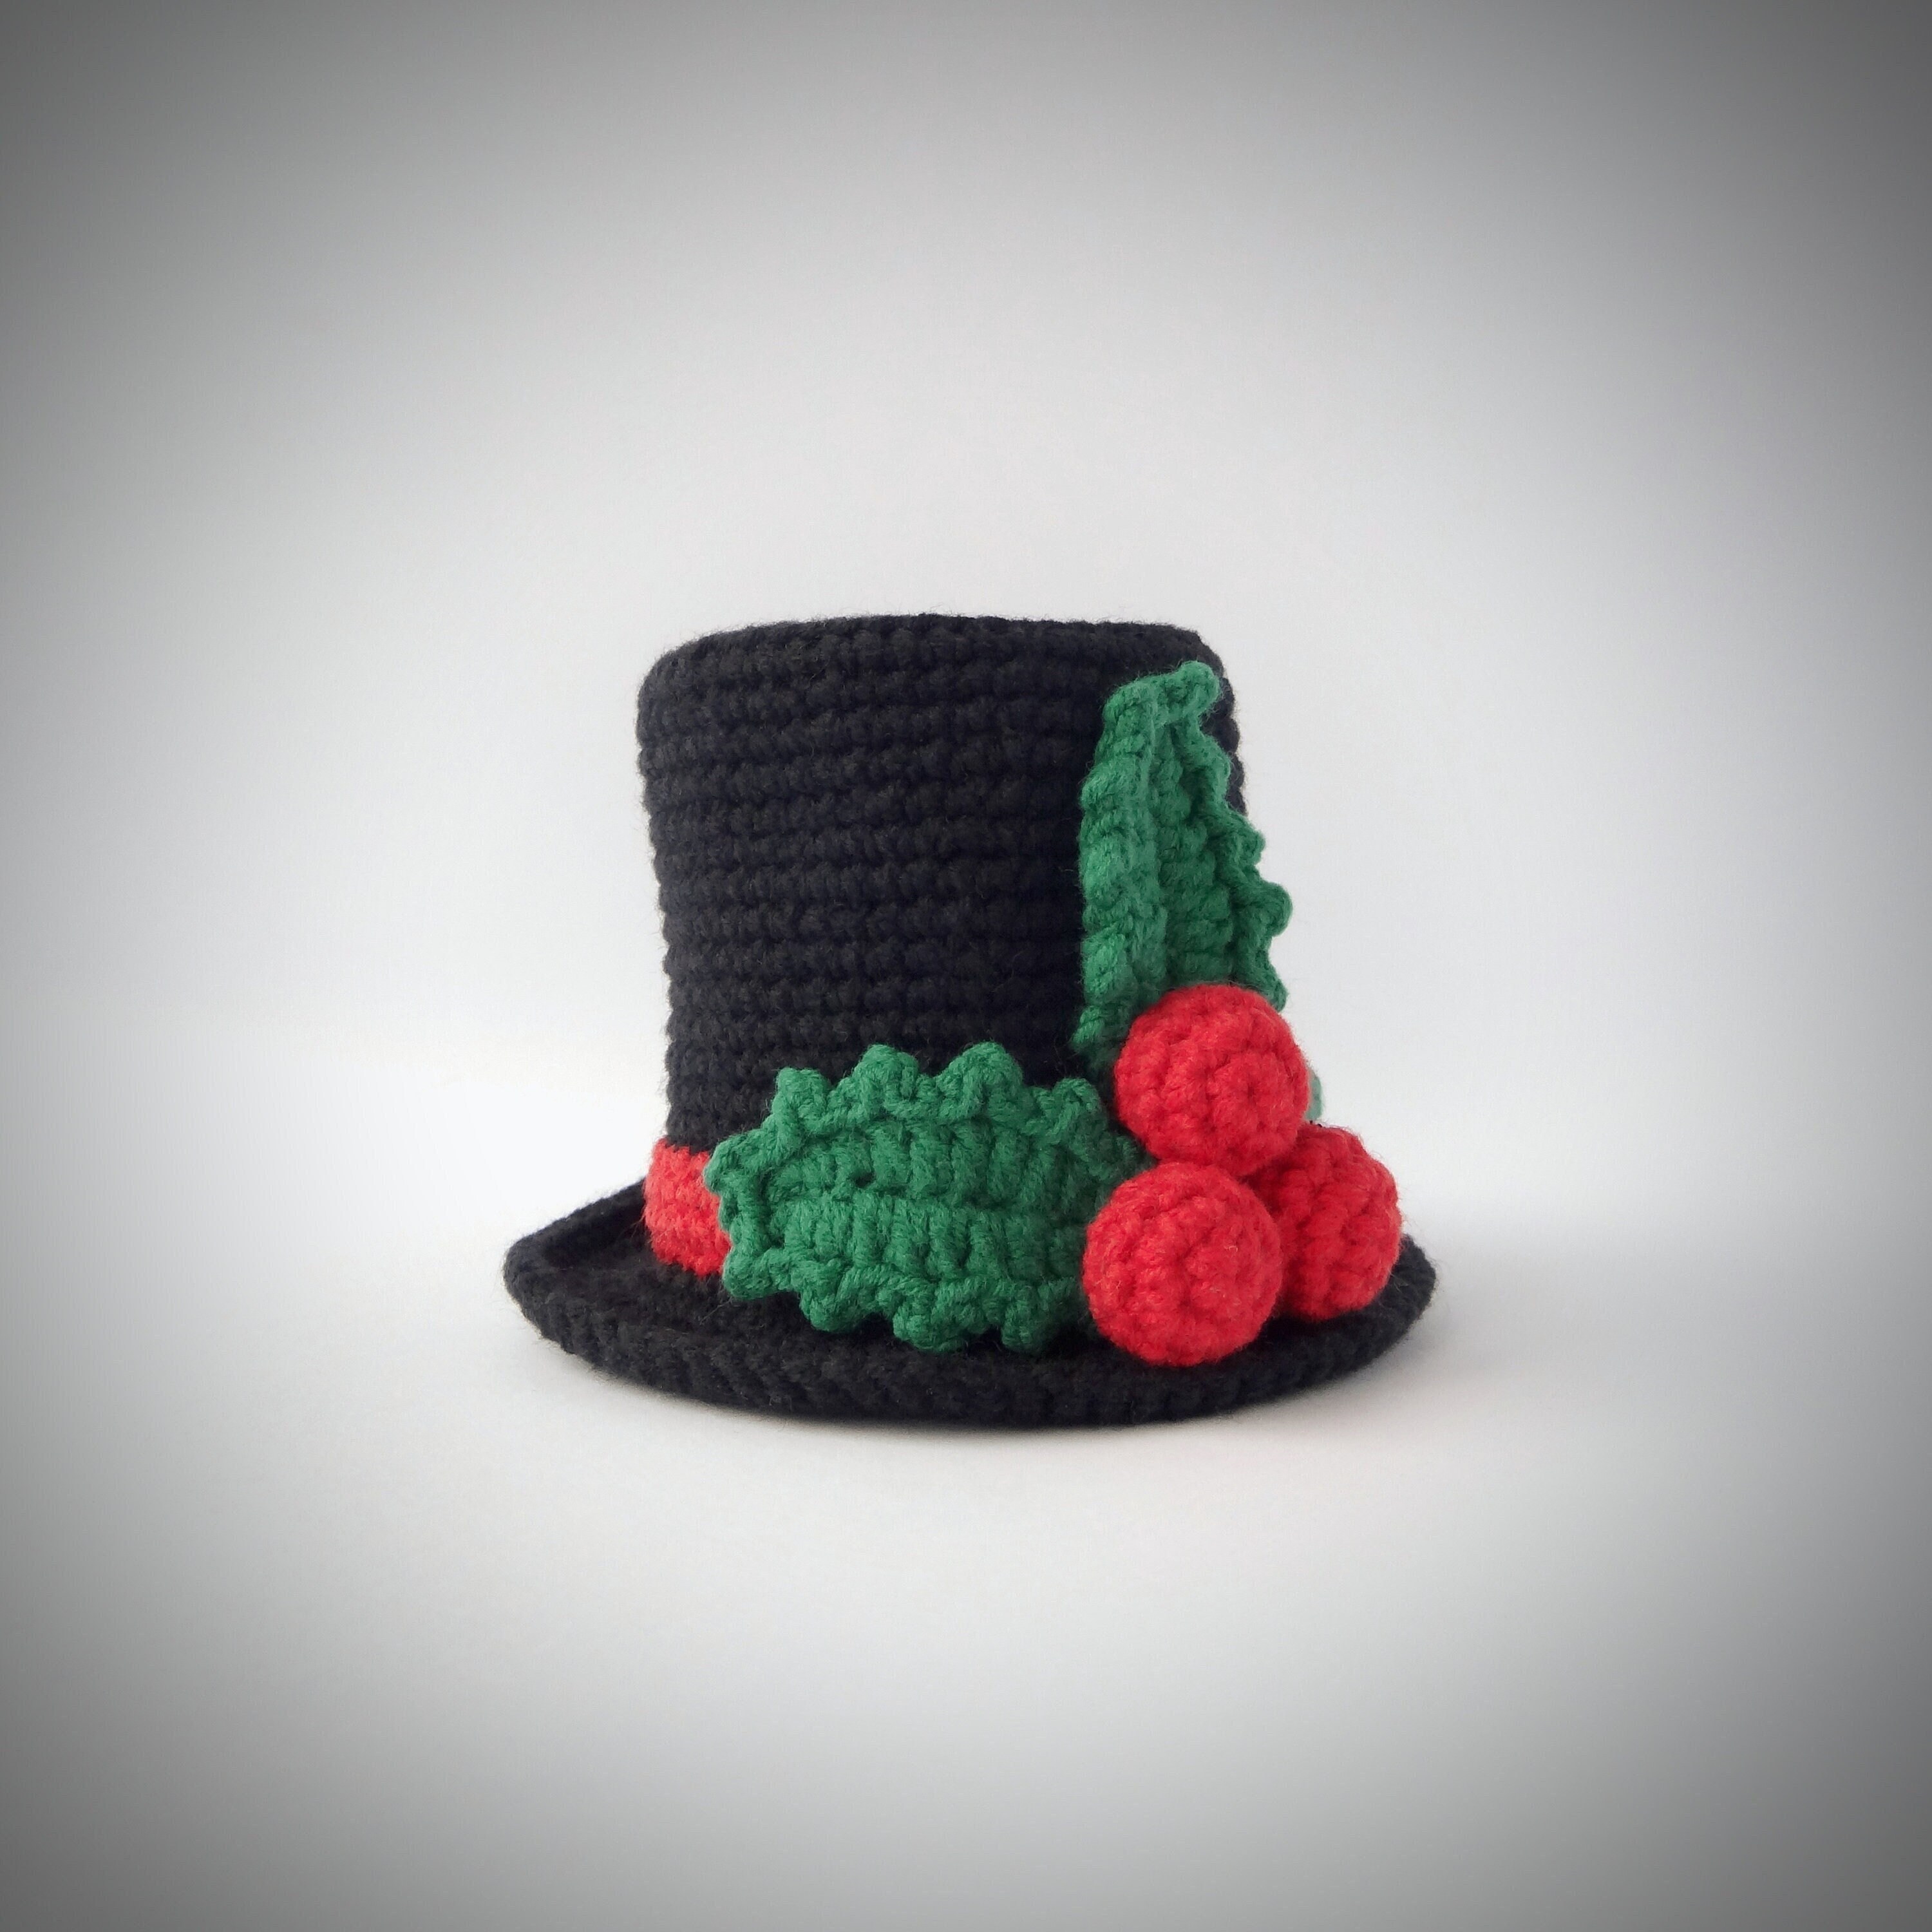 Free crochet pattern: Snowman and top hat